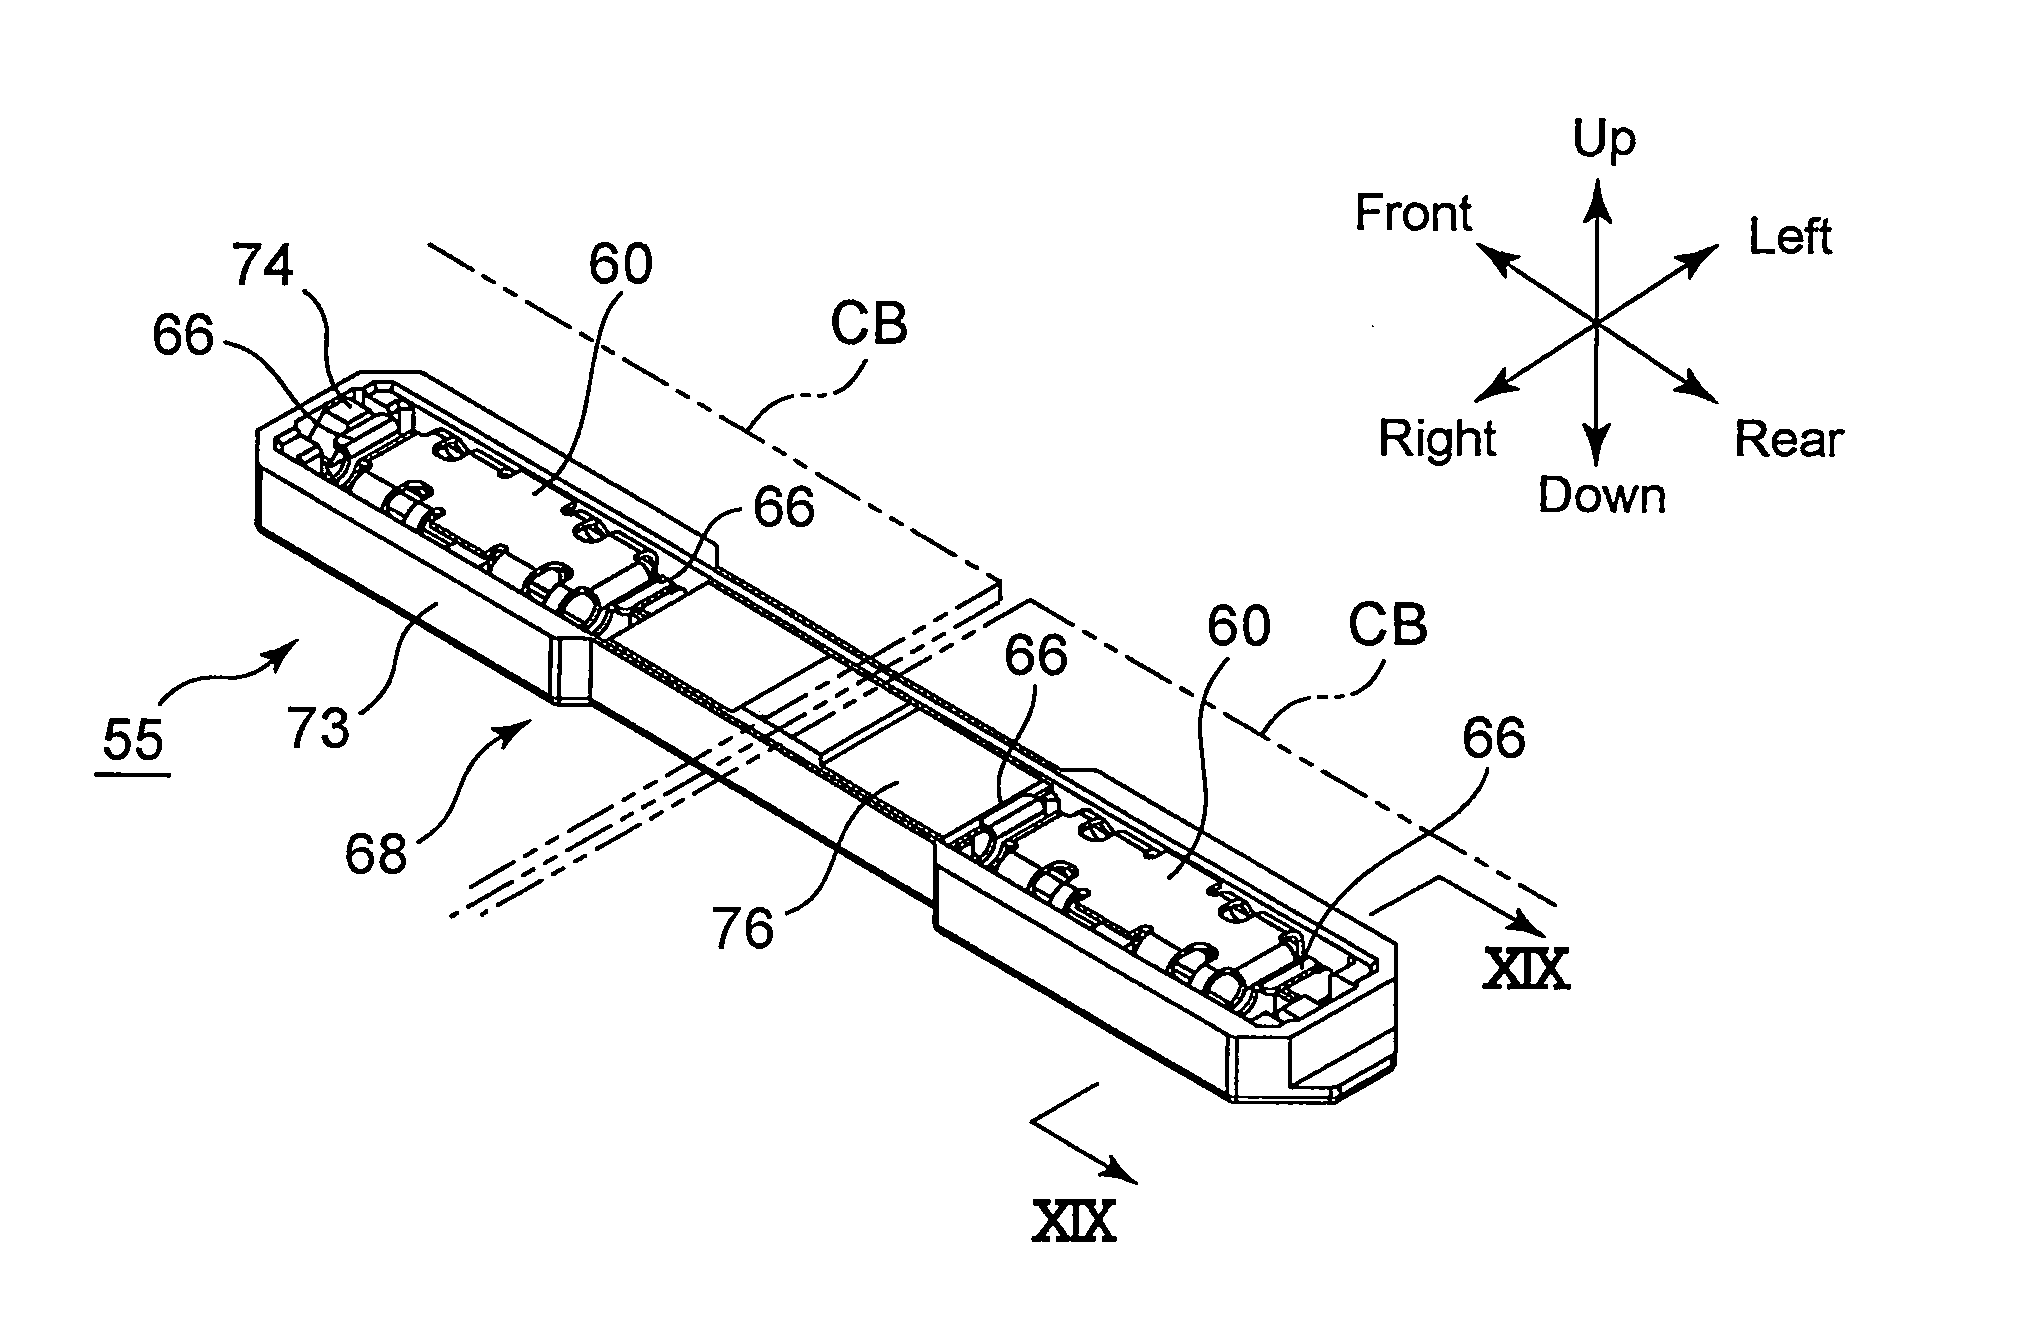 Connector, and LED lighting apparatus using the connector